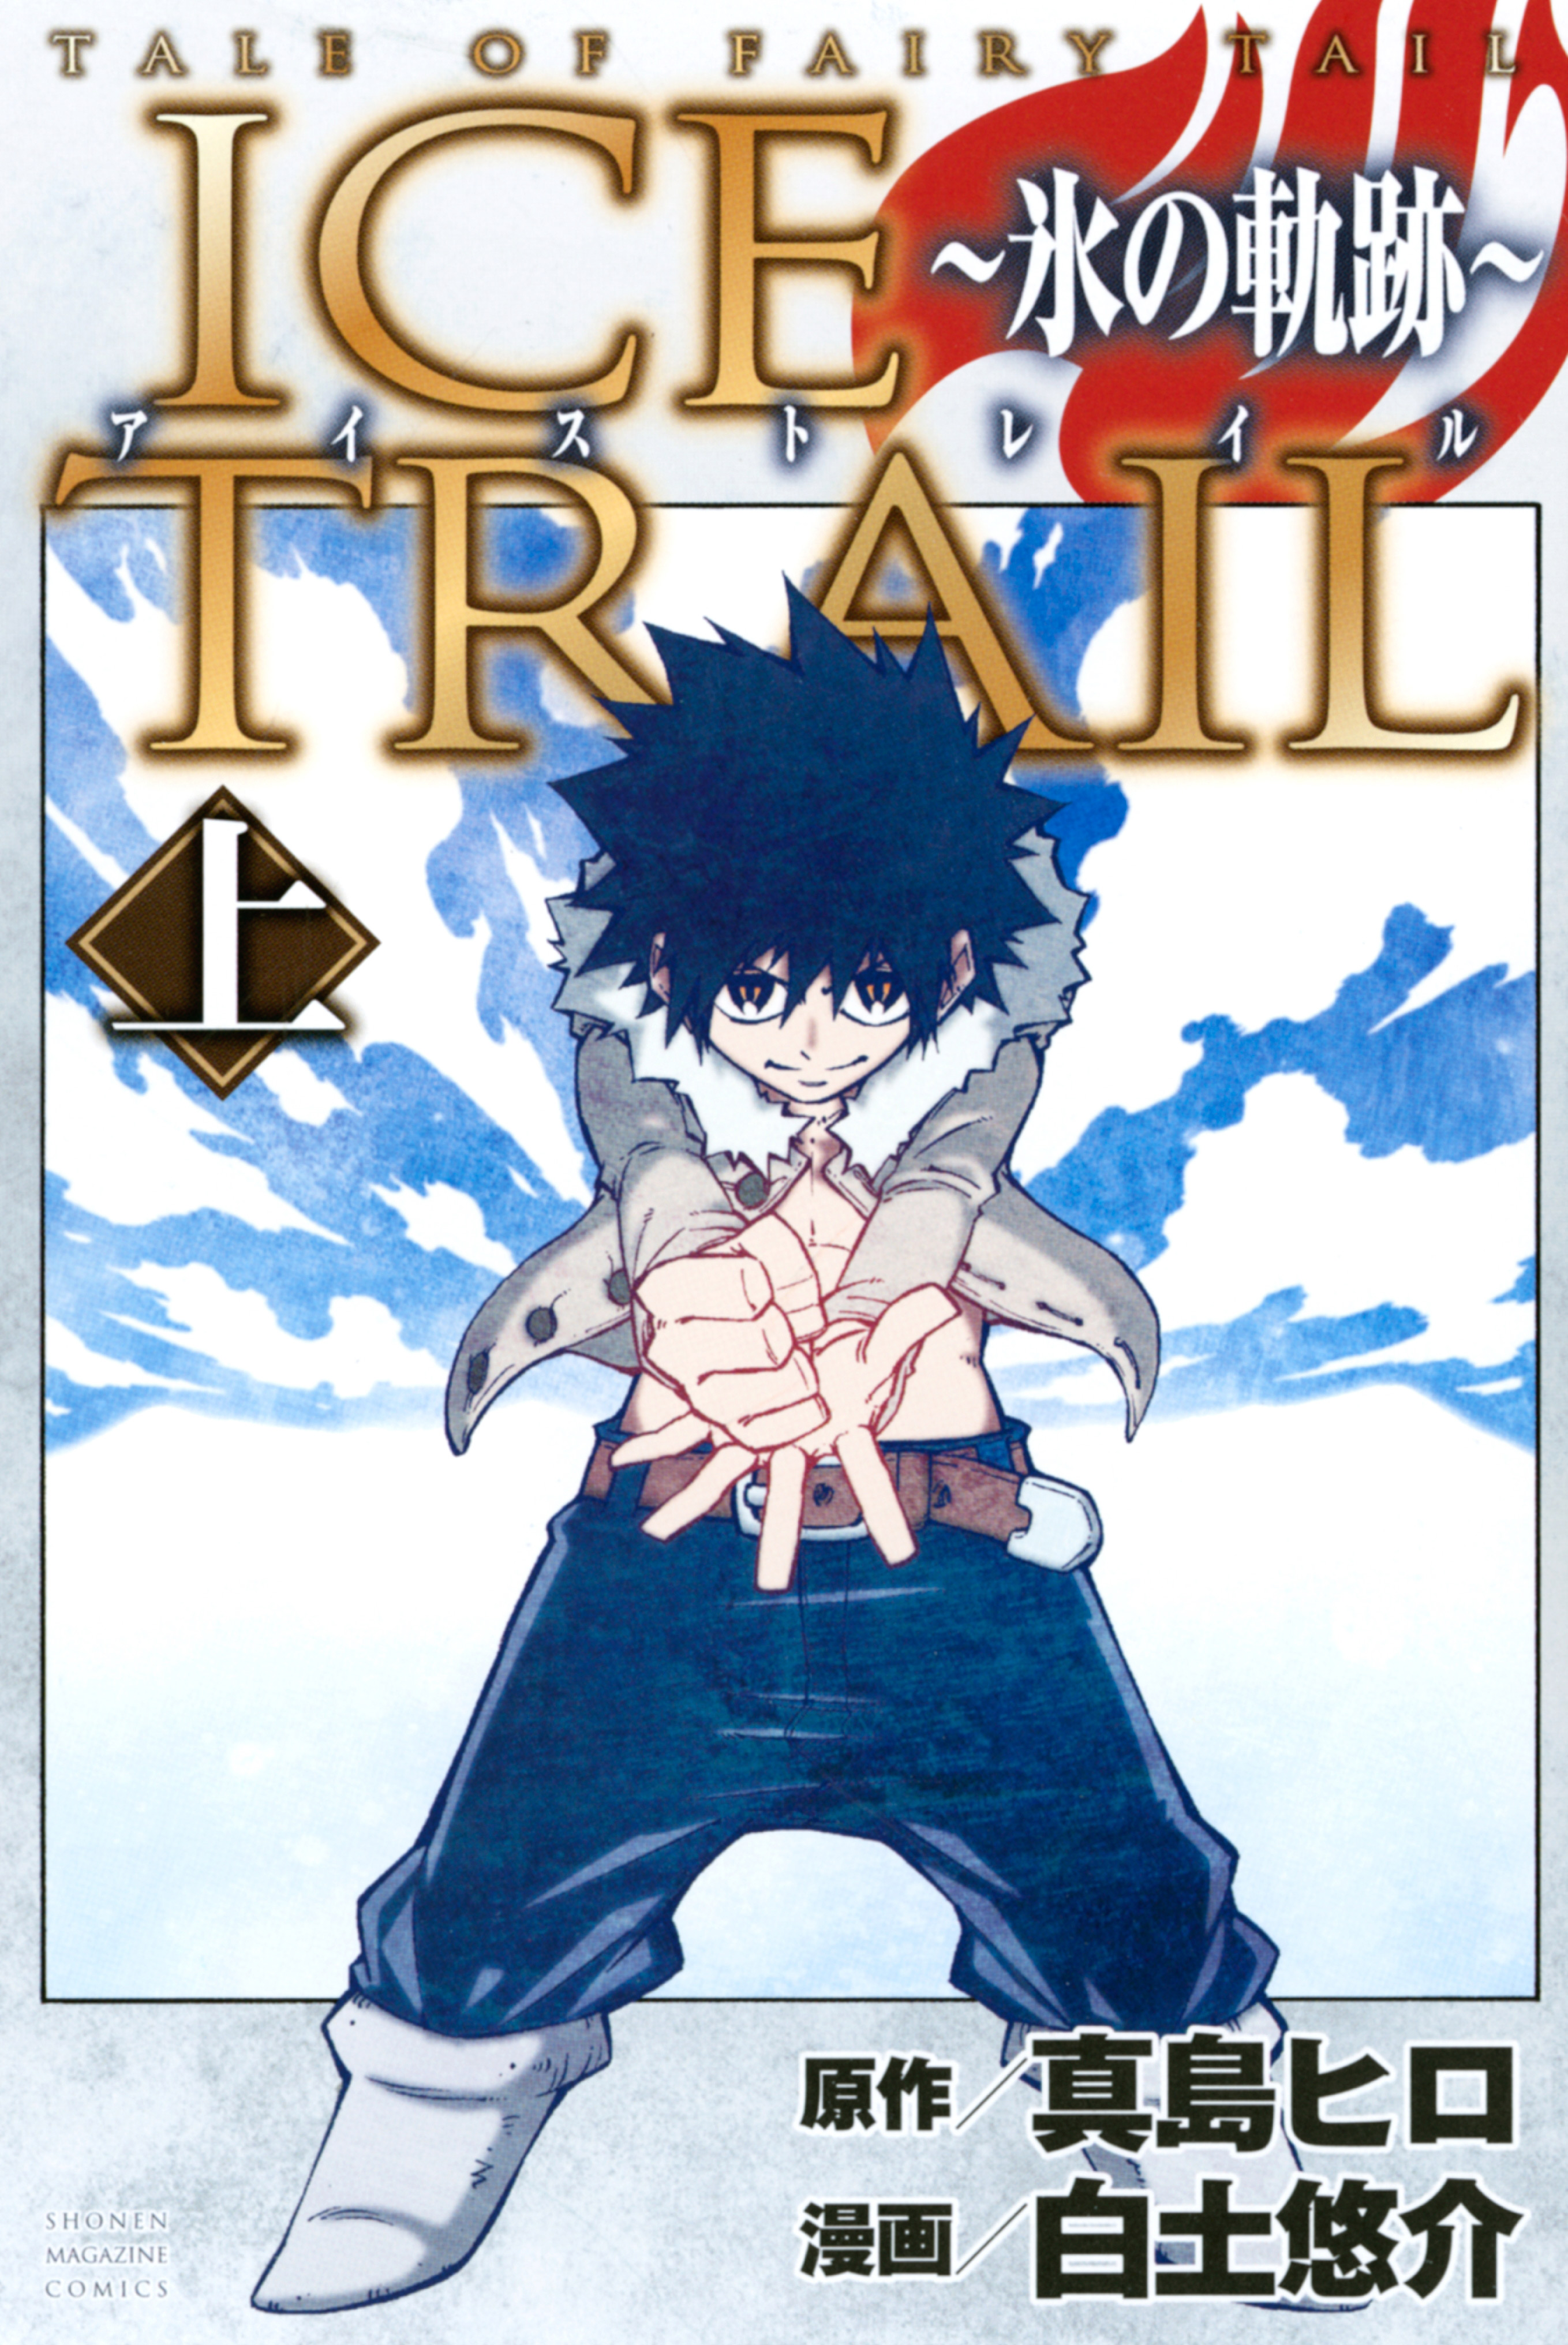 Fairy Tail: Ice Trail cover